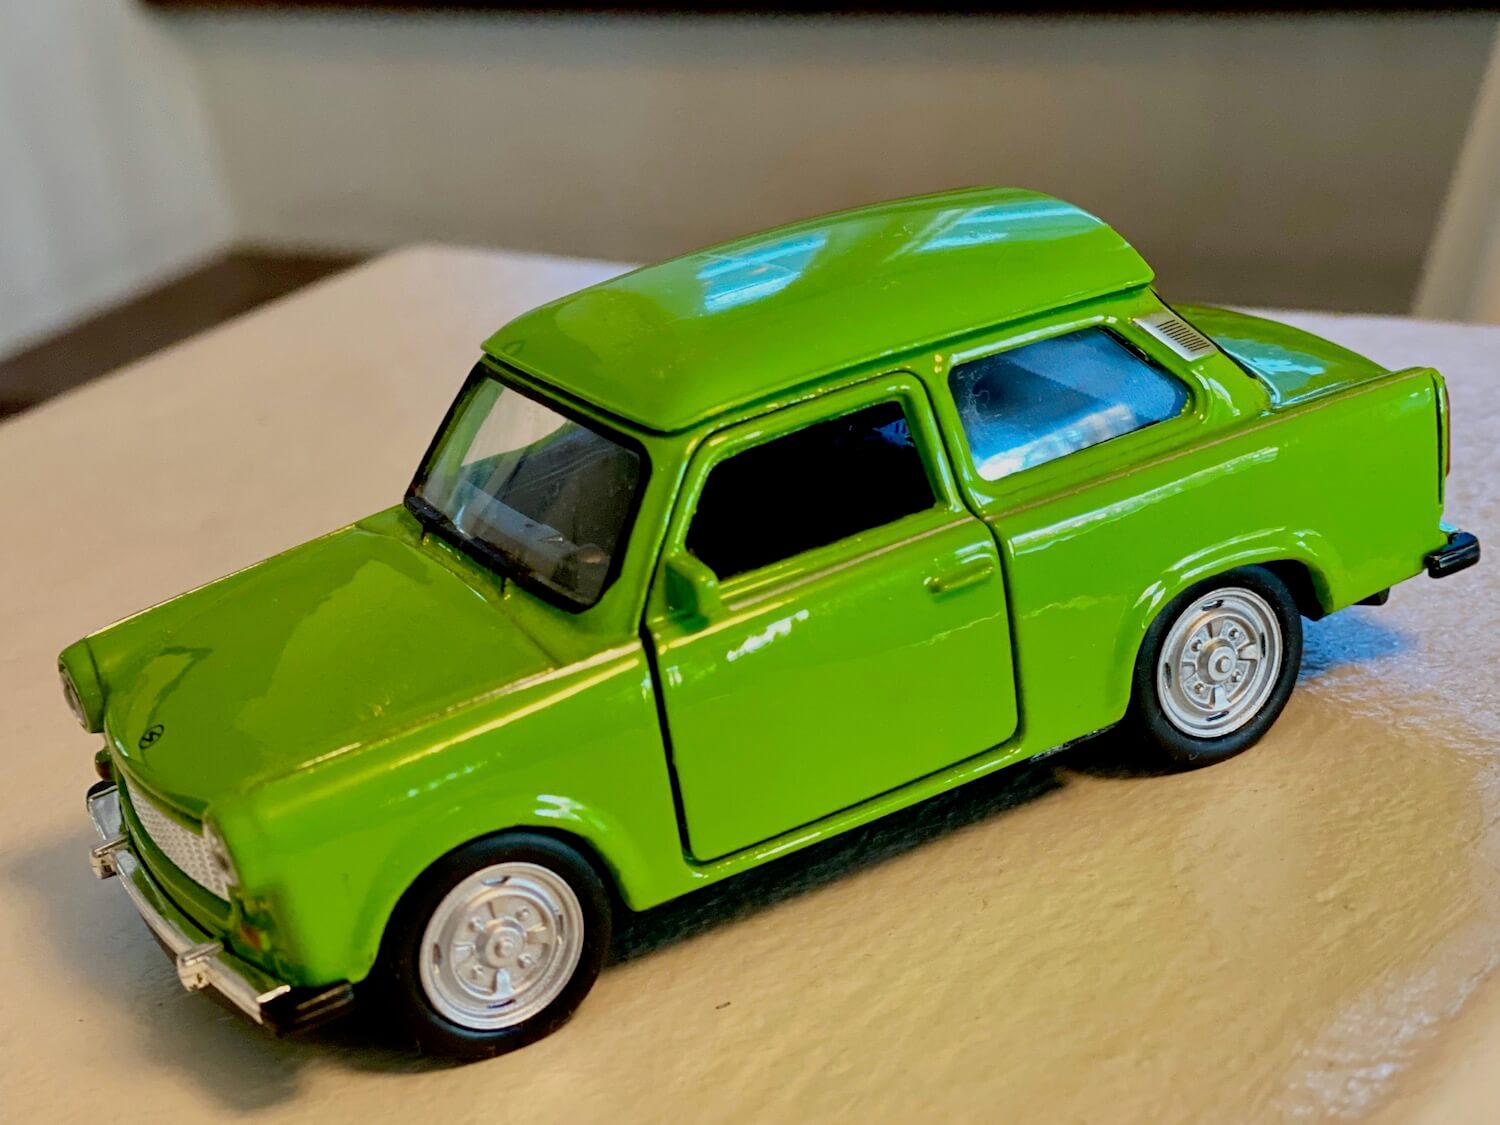 Souvenir from Berlin. Miniature size model of a former East German Trabant vehicle. The car is lime green coupe version with tiny doors and wheels with silver hub caps.